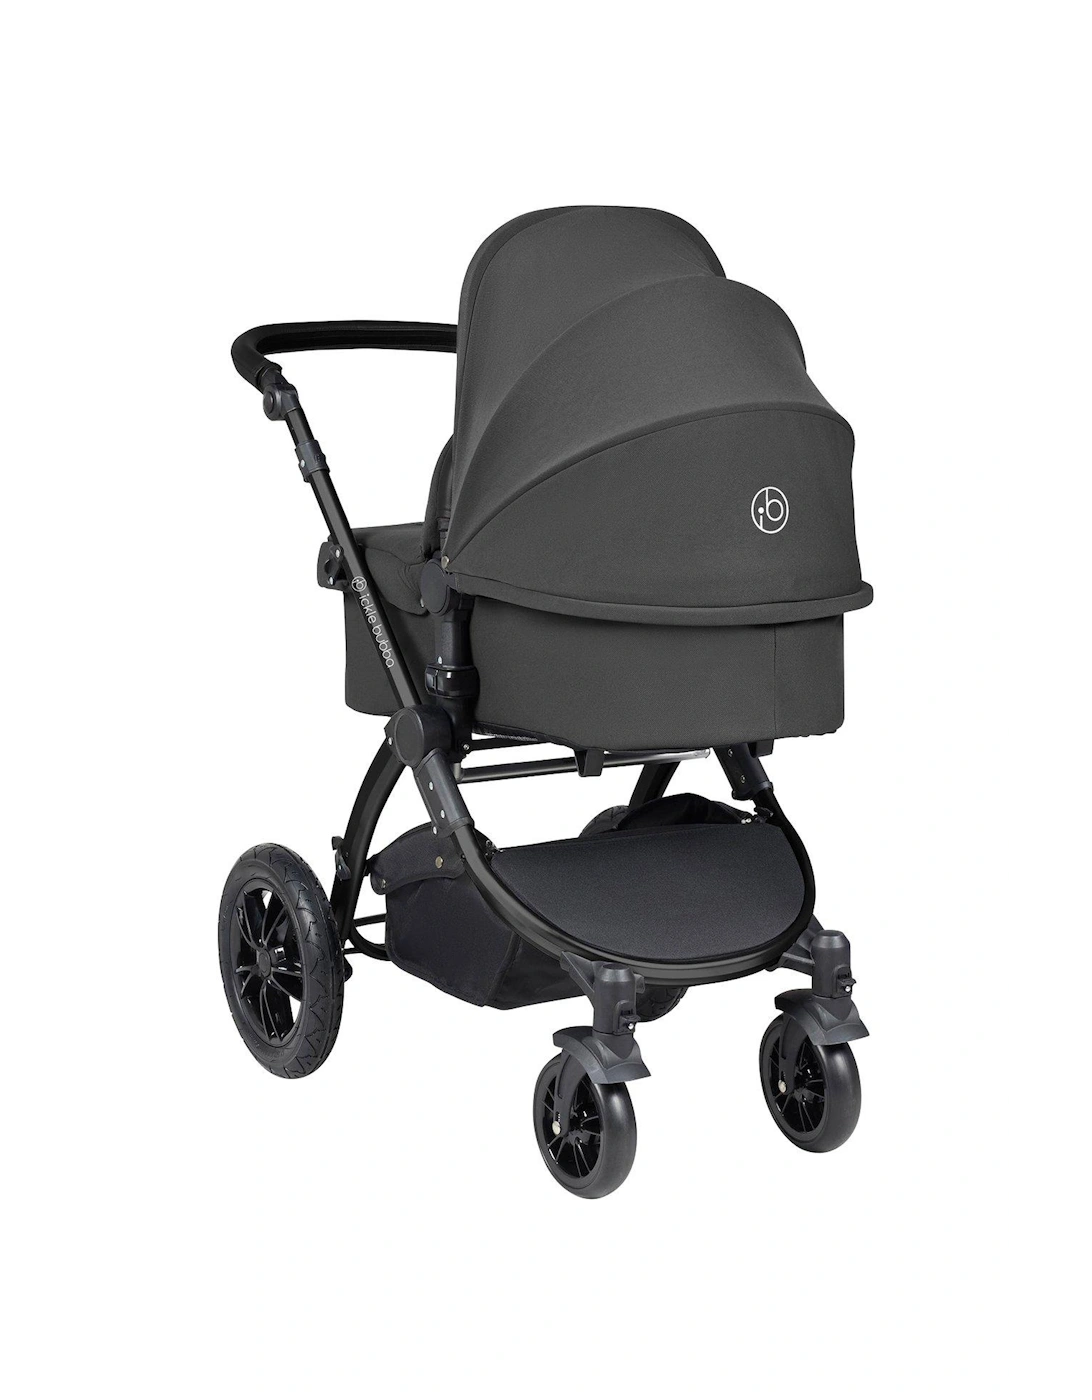 Stomp Luxe All-in-One I-Size Travel System With Isofix Base (Stratus)